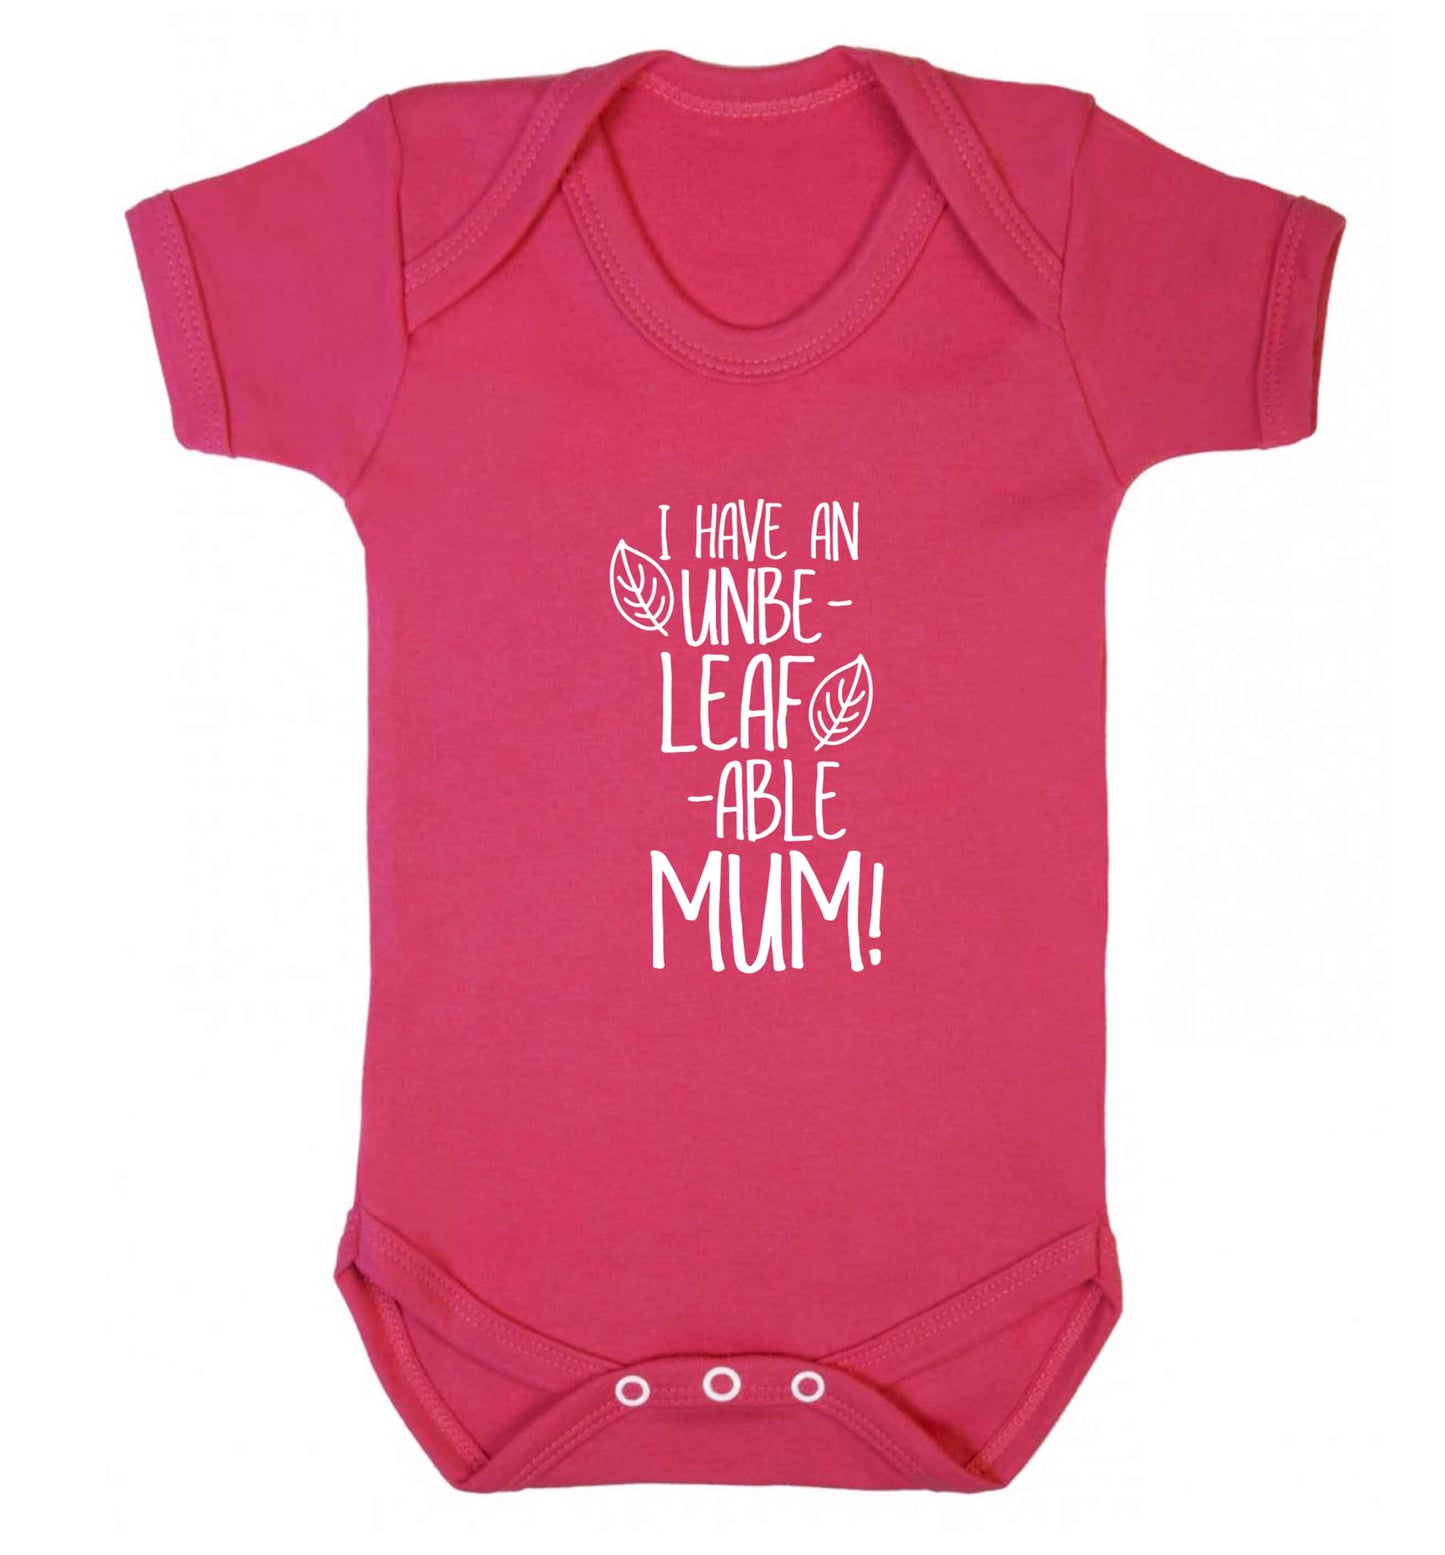 I have an unbeleafable mum! baby vest dark pink 18-24 months